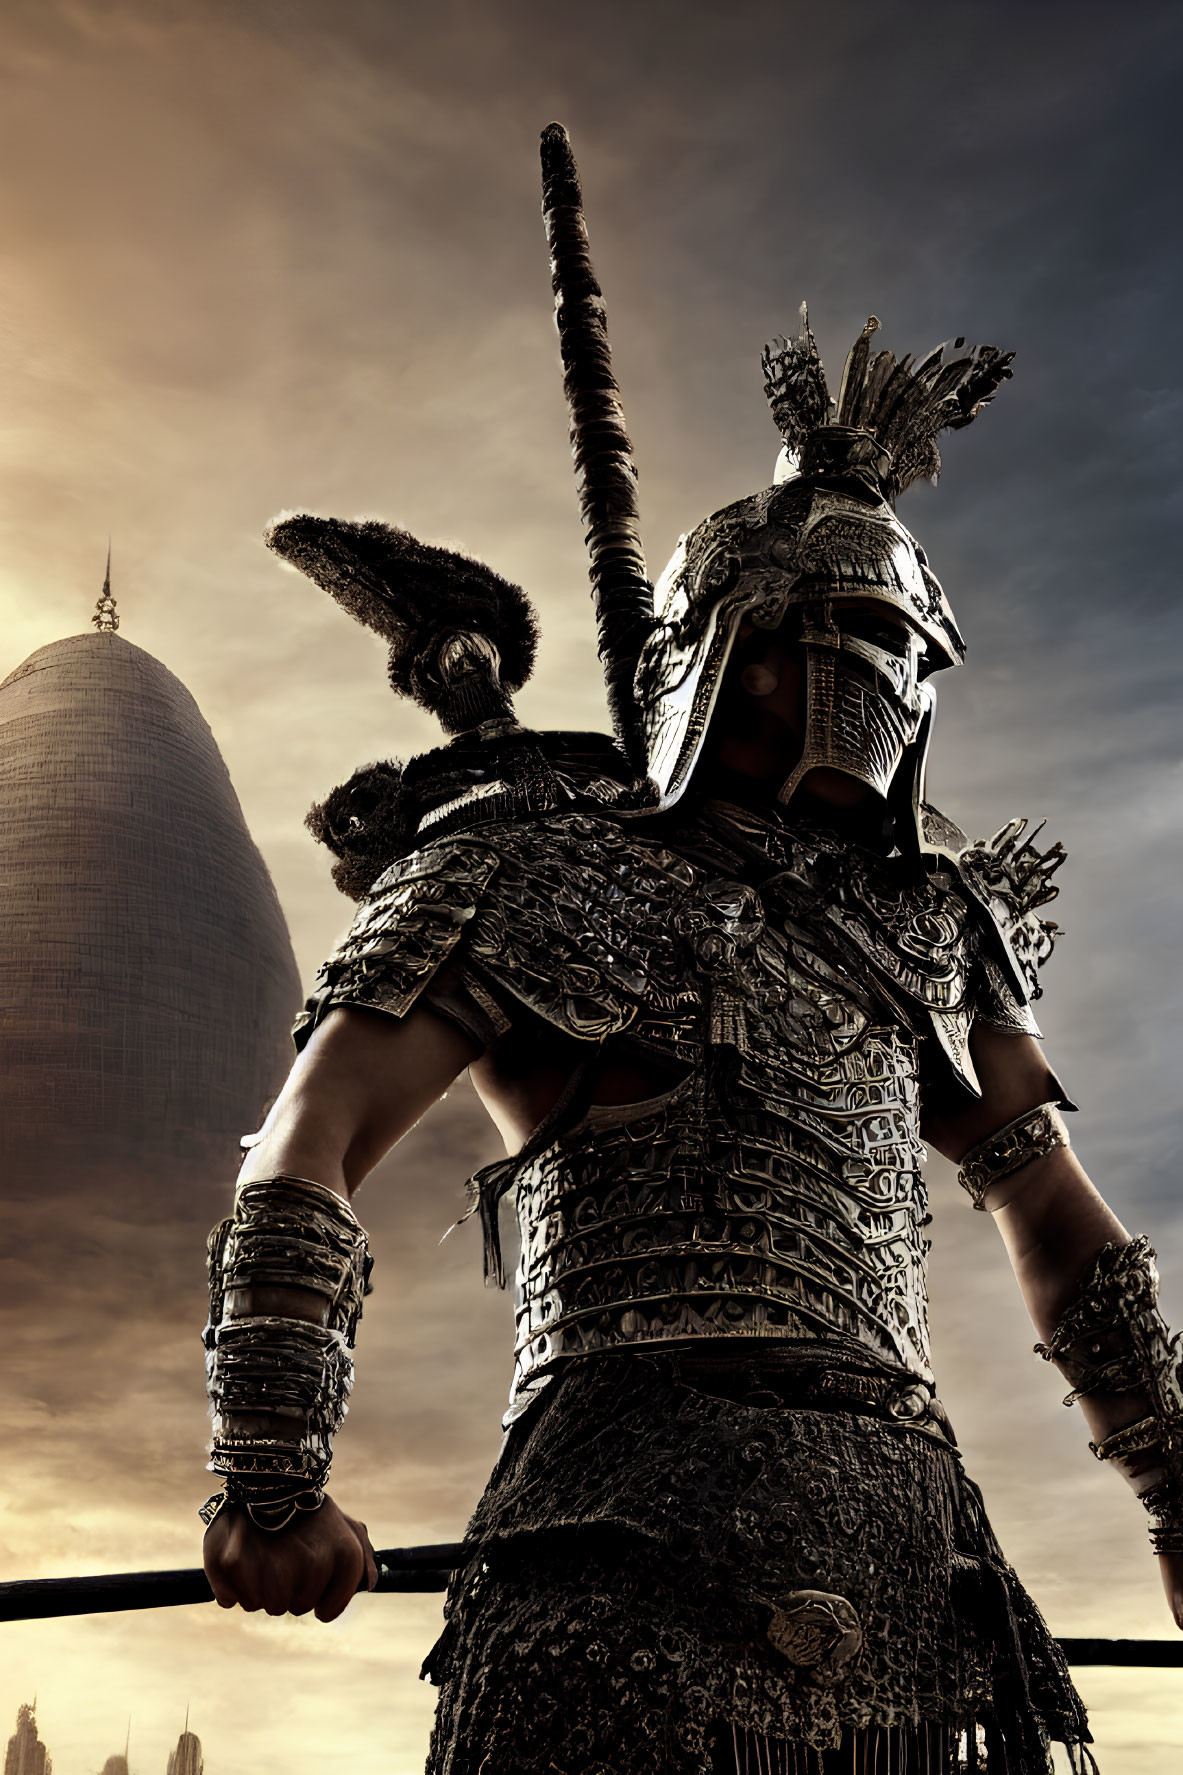 Ornate armored warrior with feathered helmet holding spear in front of domed structure at dusk.